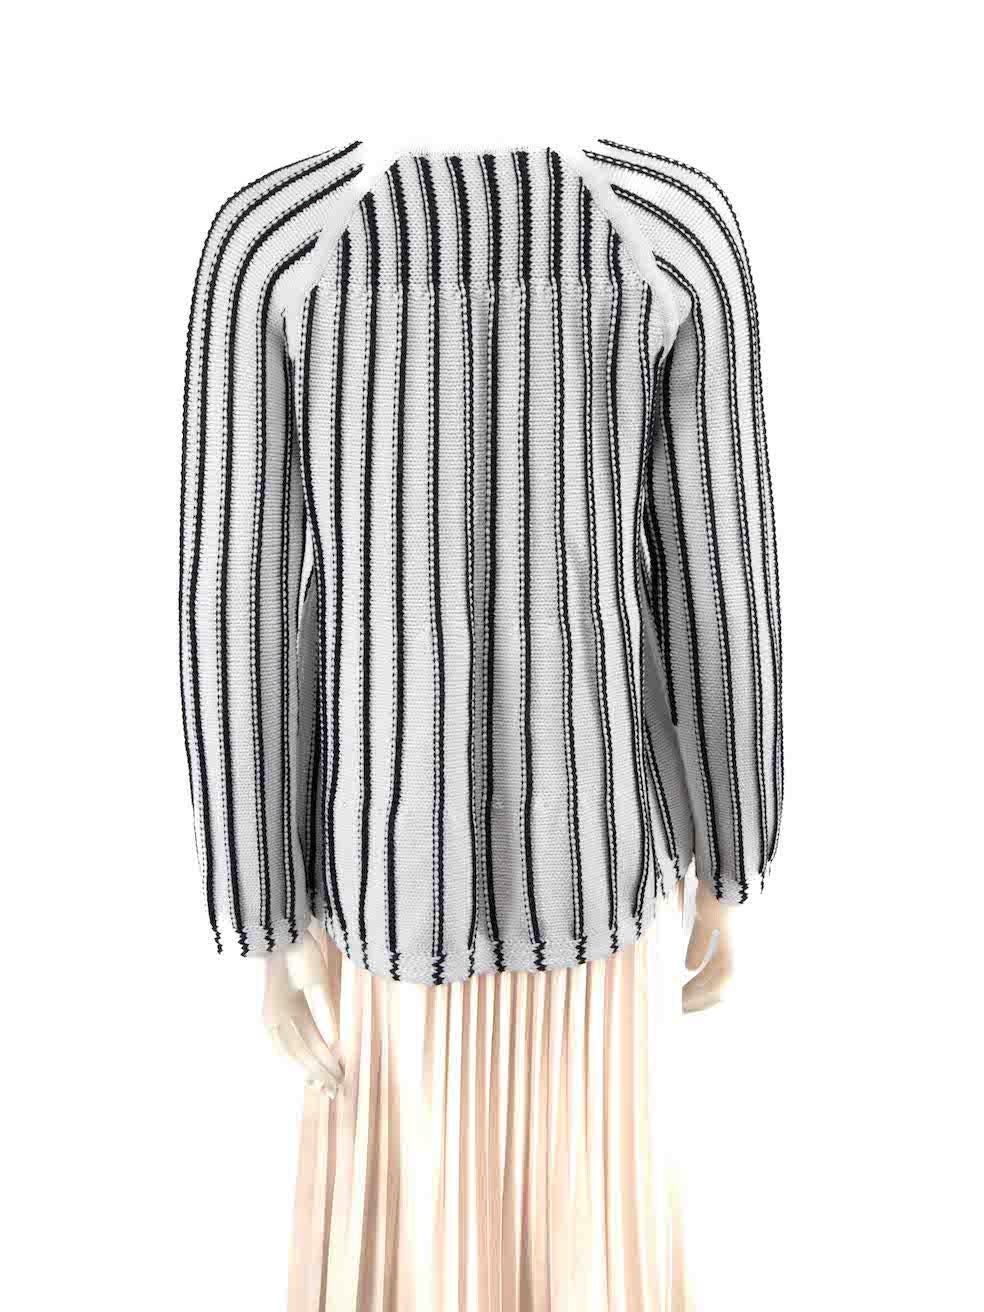 ME+EM White Striped Jumper Size M In New Condition For Sale In London, GB